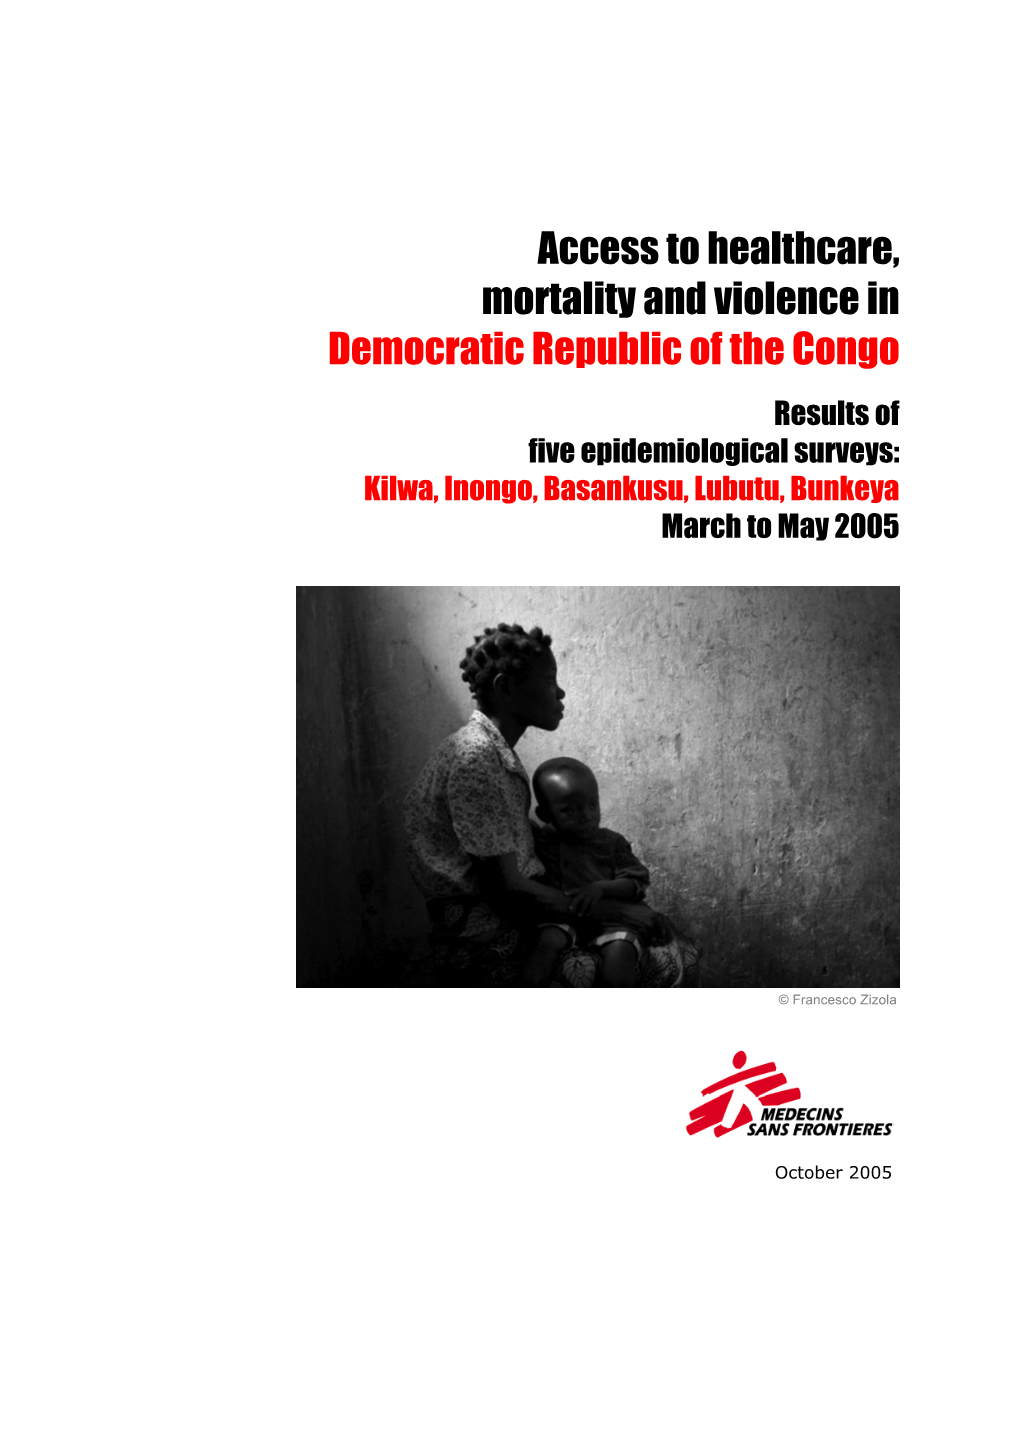 Access to Healthcare, Mortality and Violence in Democratic Republic of the Congo